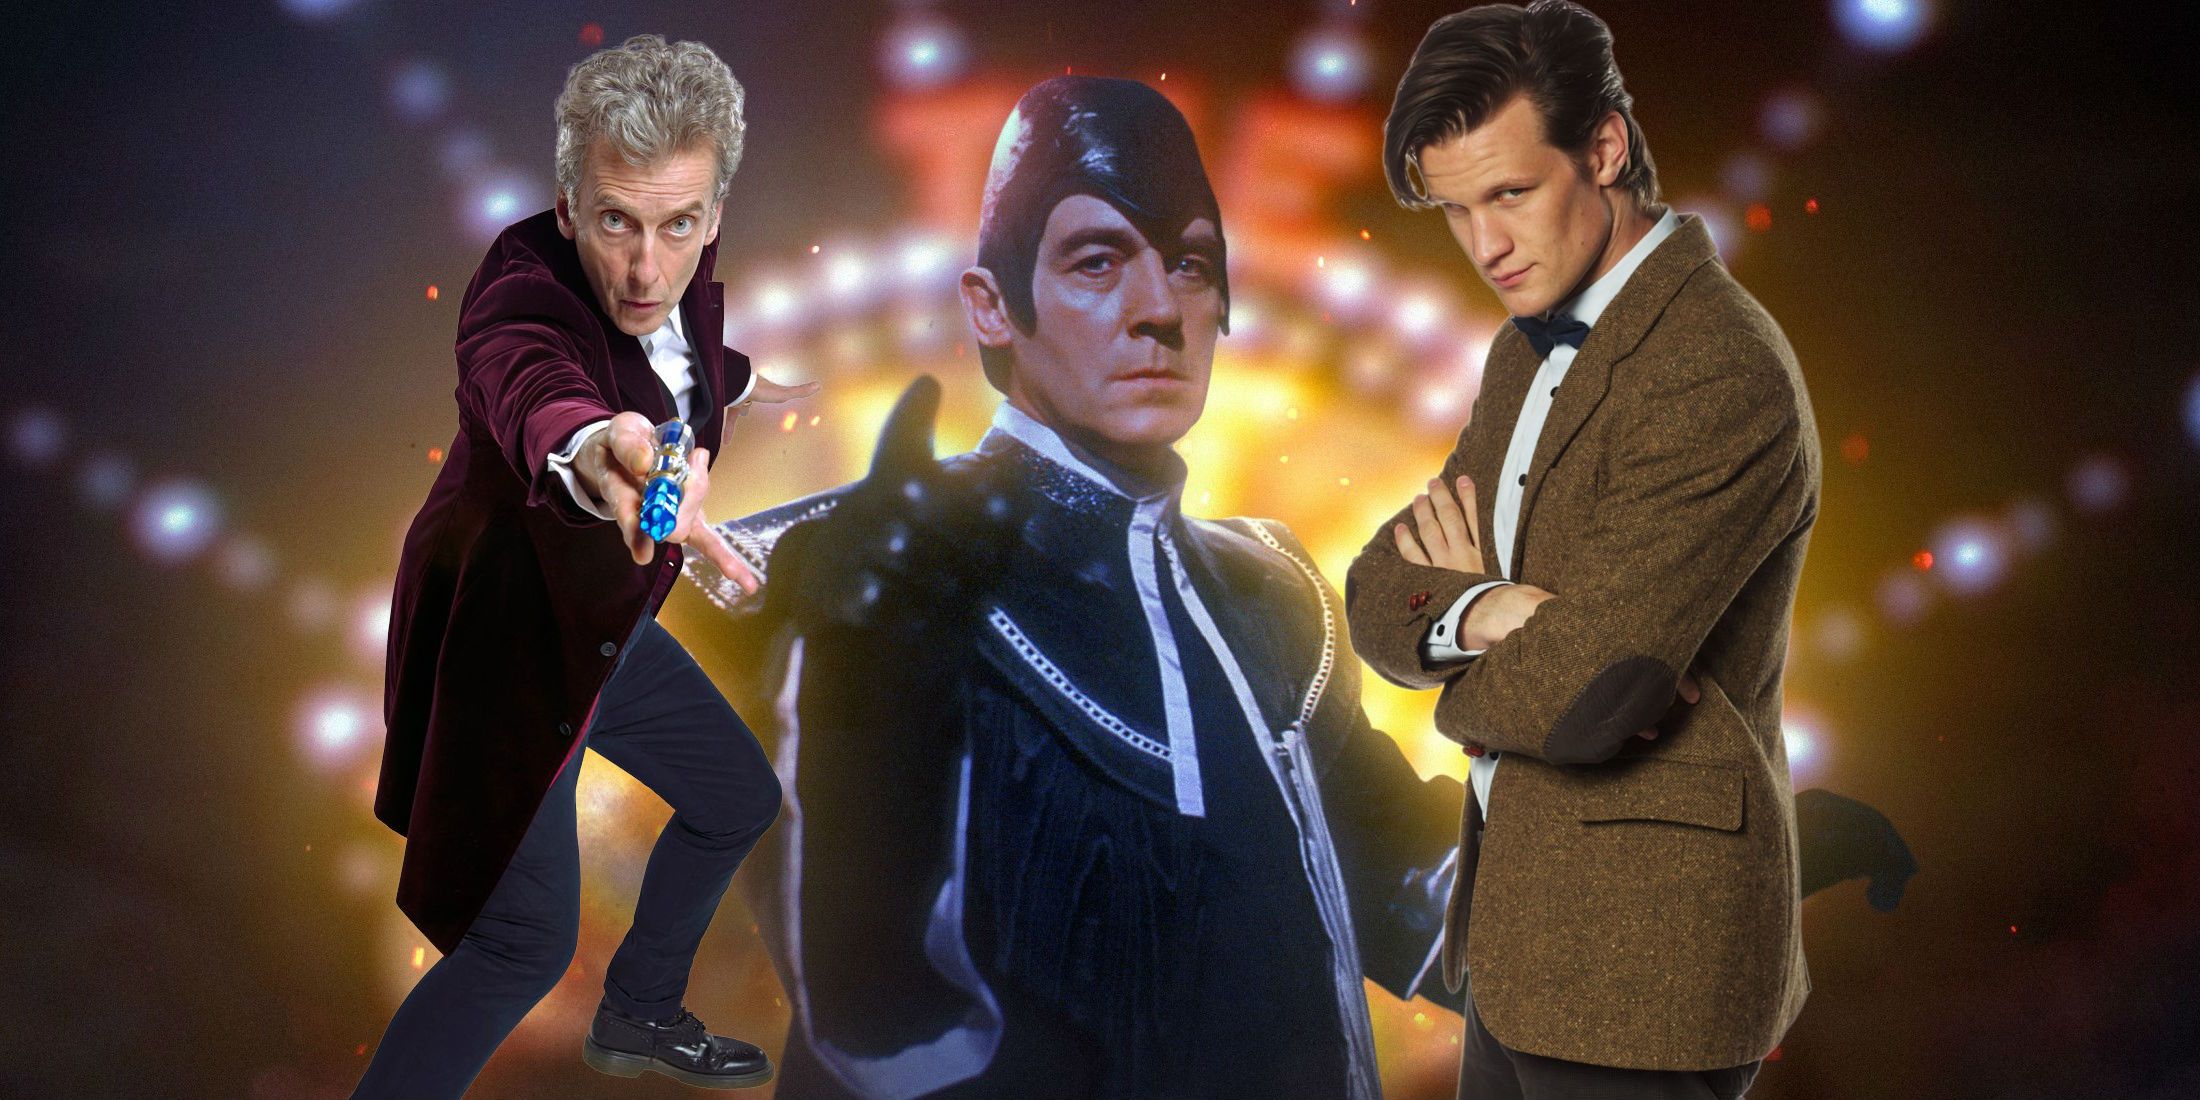 Michael Jayston as the Valeyard Matt Smith as Eleventh Doctor and Peter Capaldi as Twelfth Doctor in Doctor Who